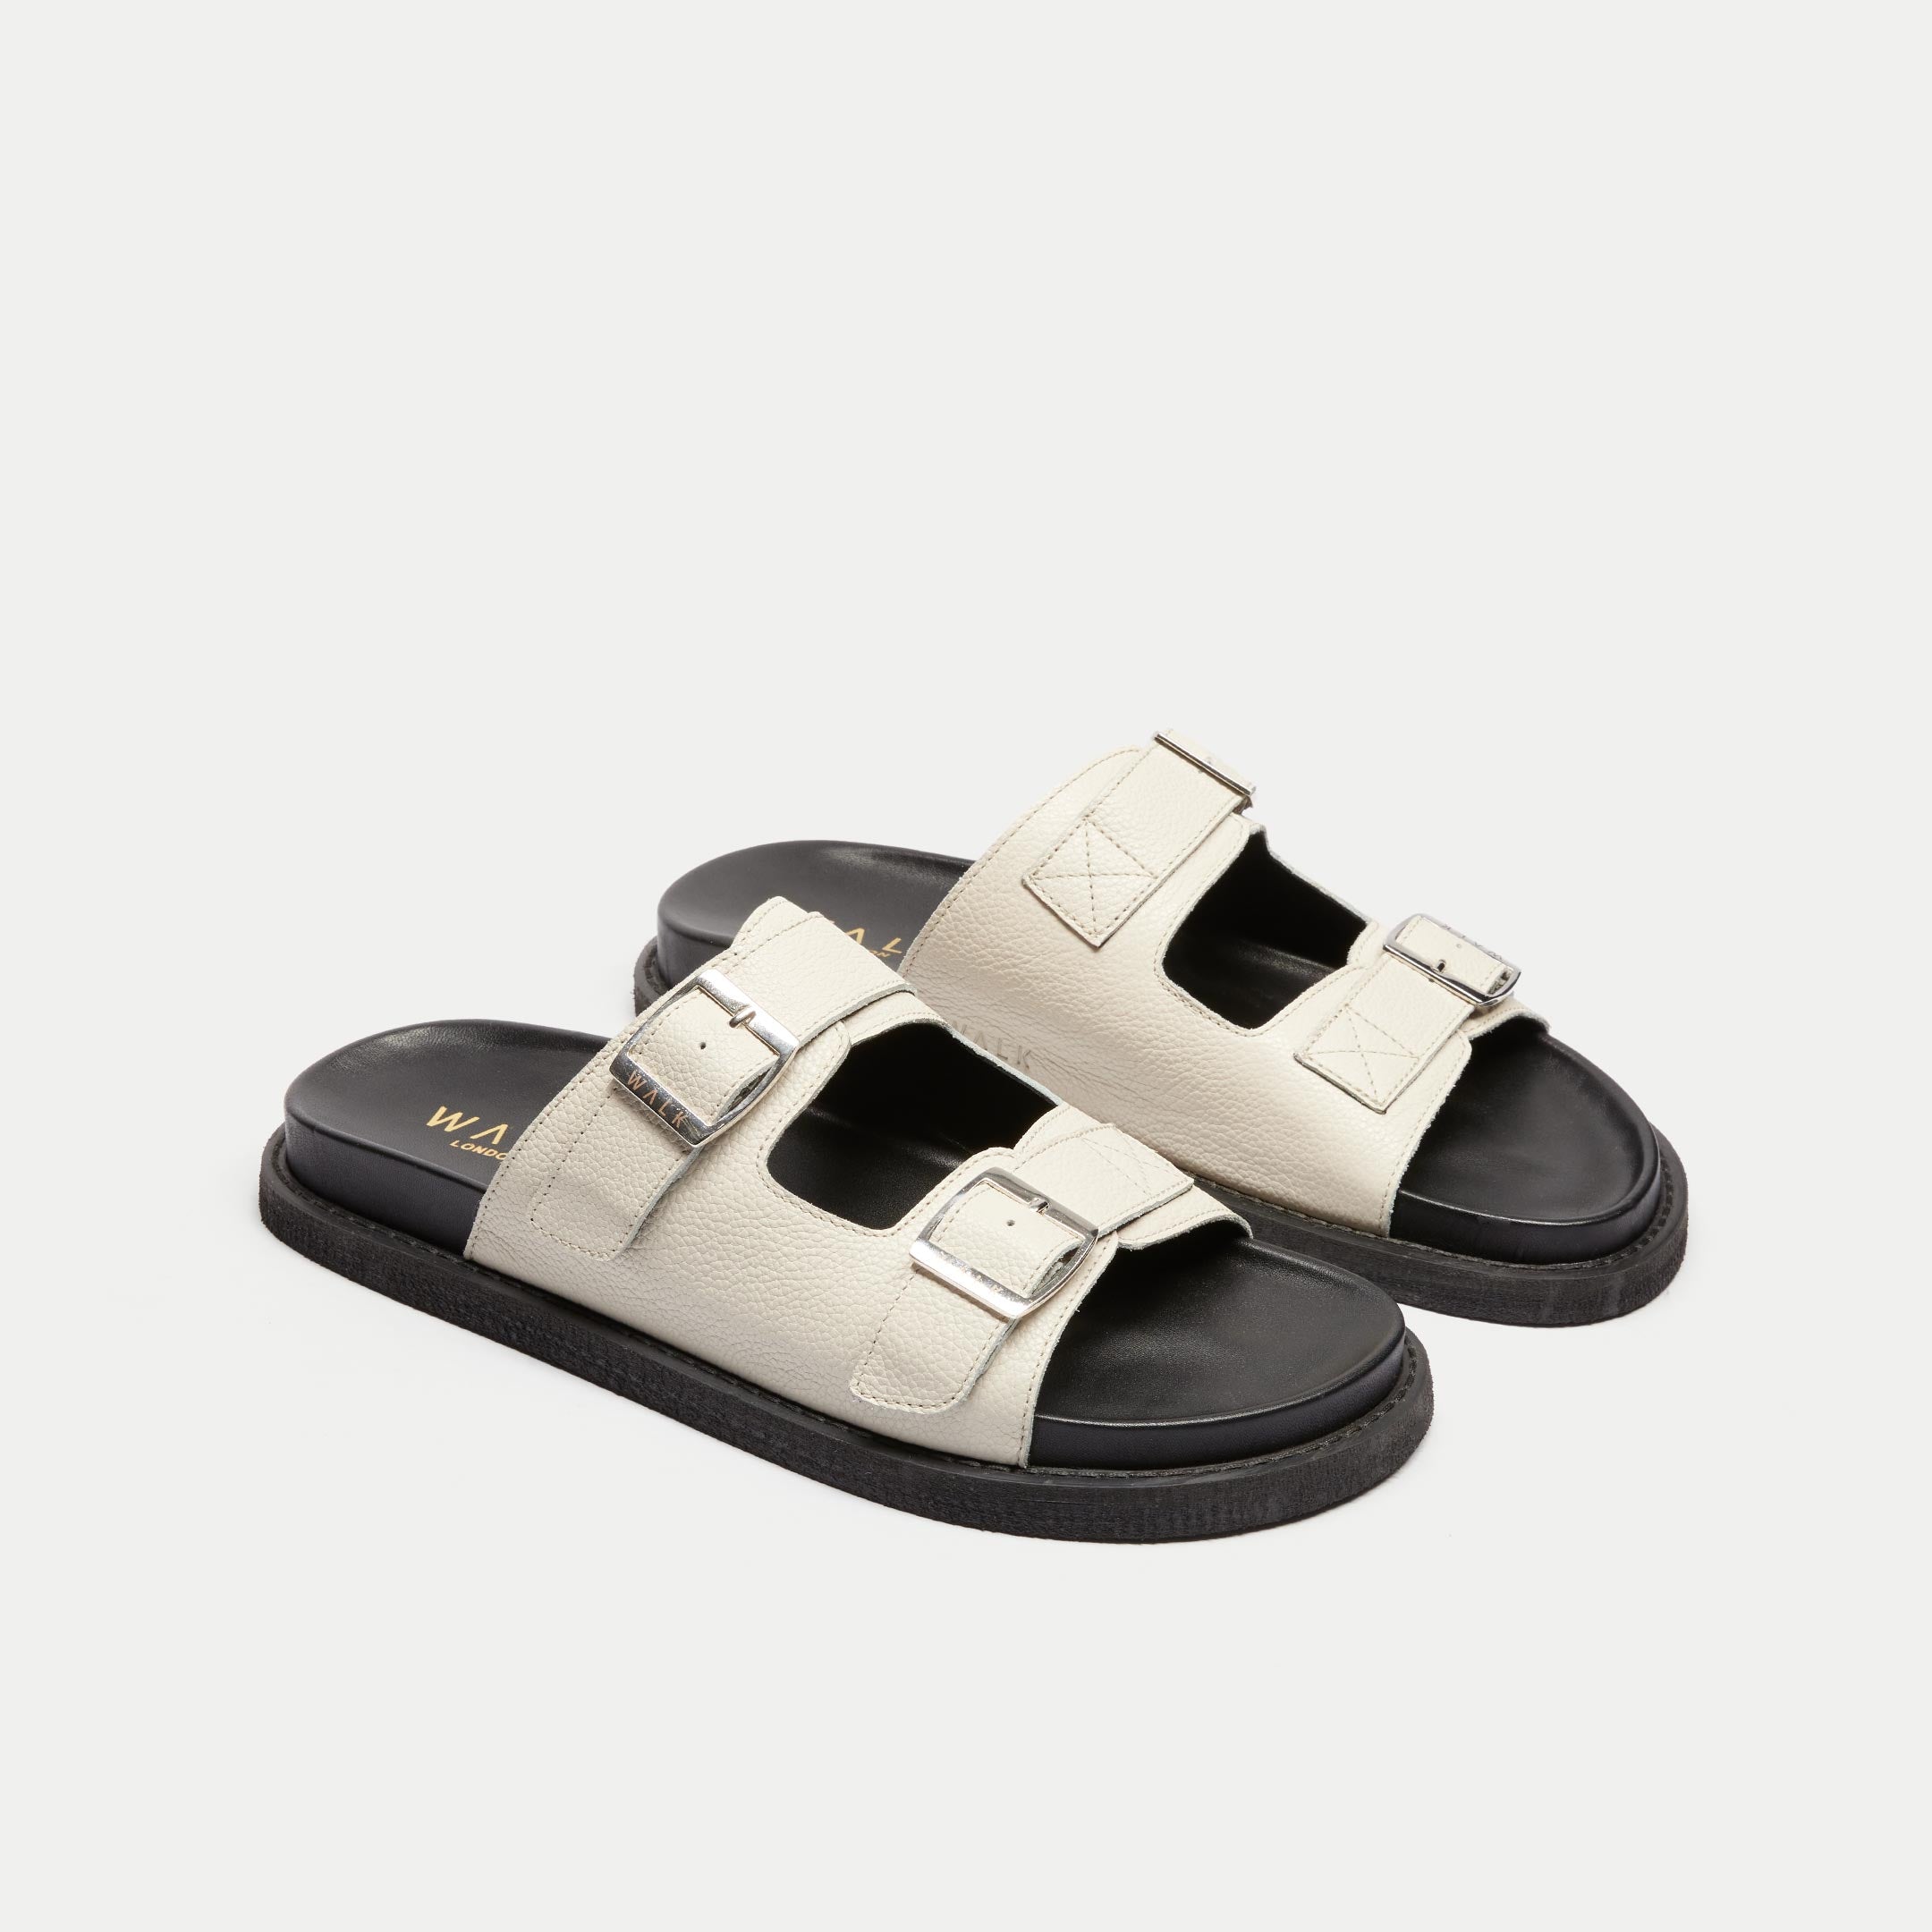 Walk London Shore Double Strap Sandal in Off White Leather